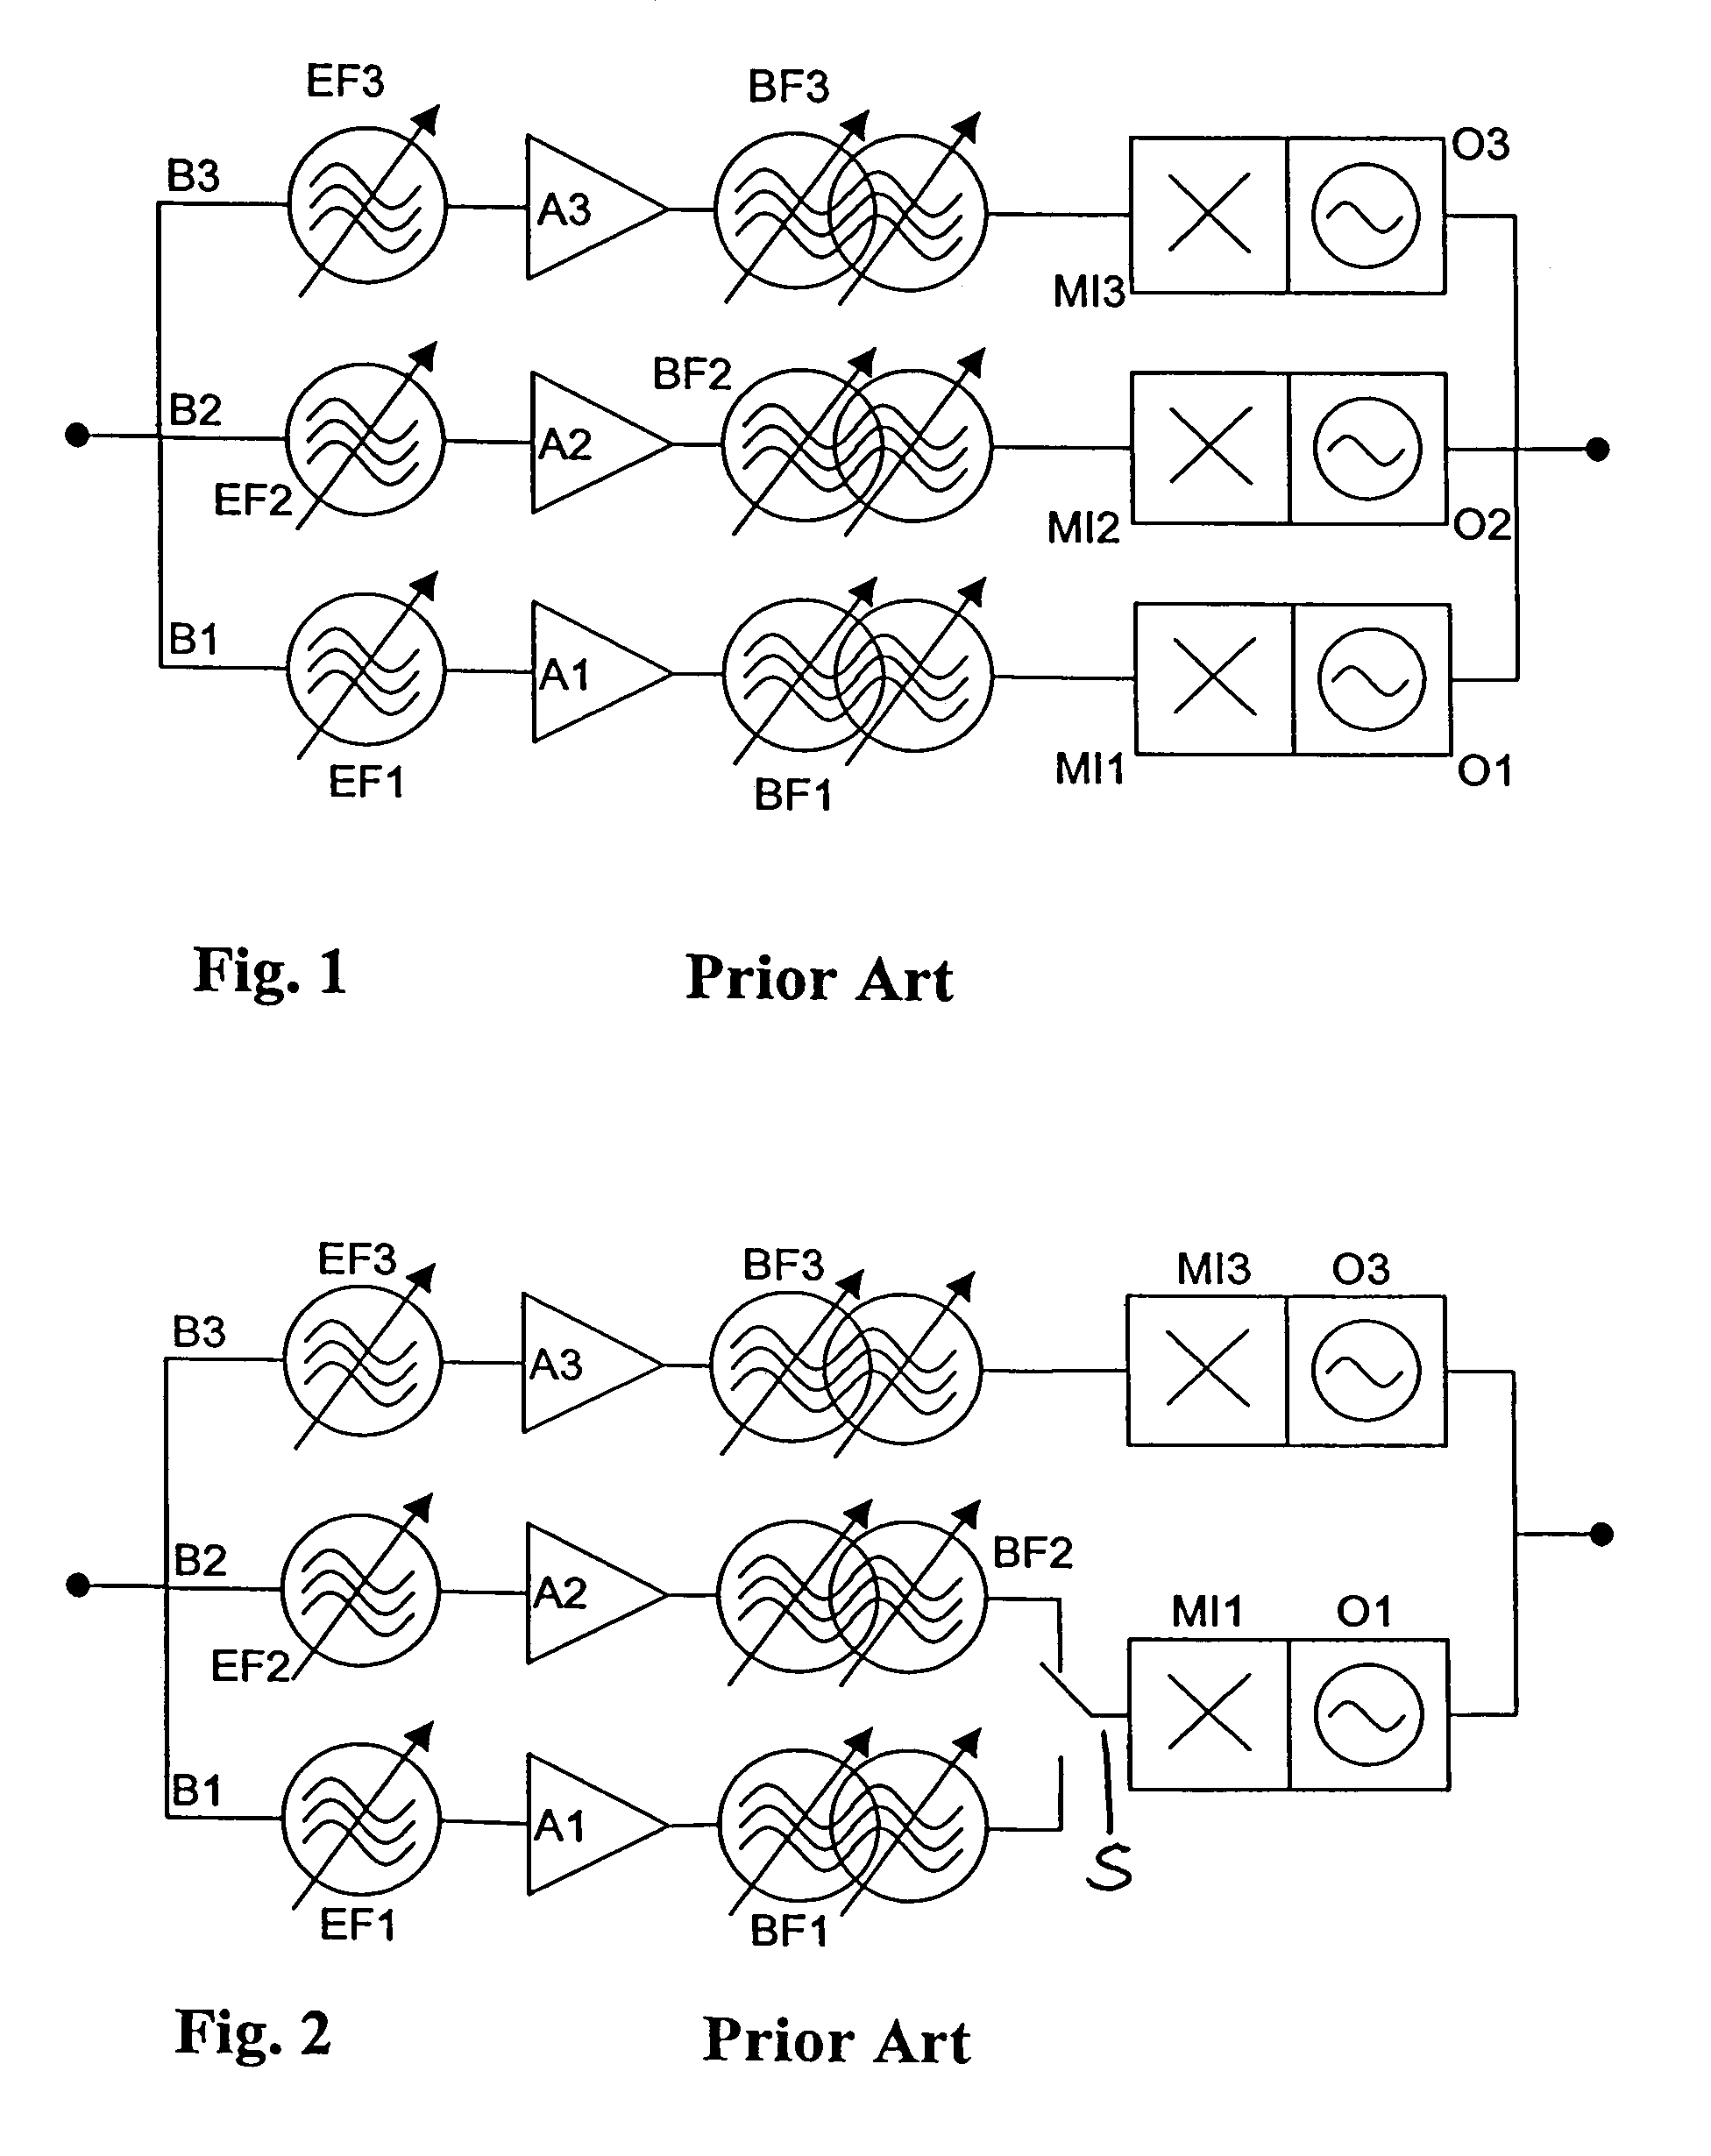 Switchable tuneable bandpass filter with optimized frequency response